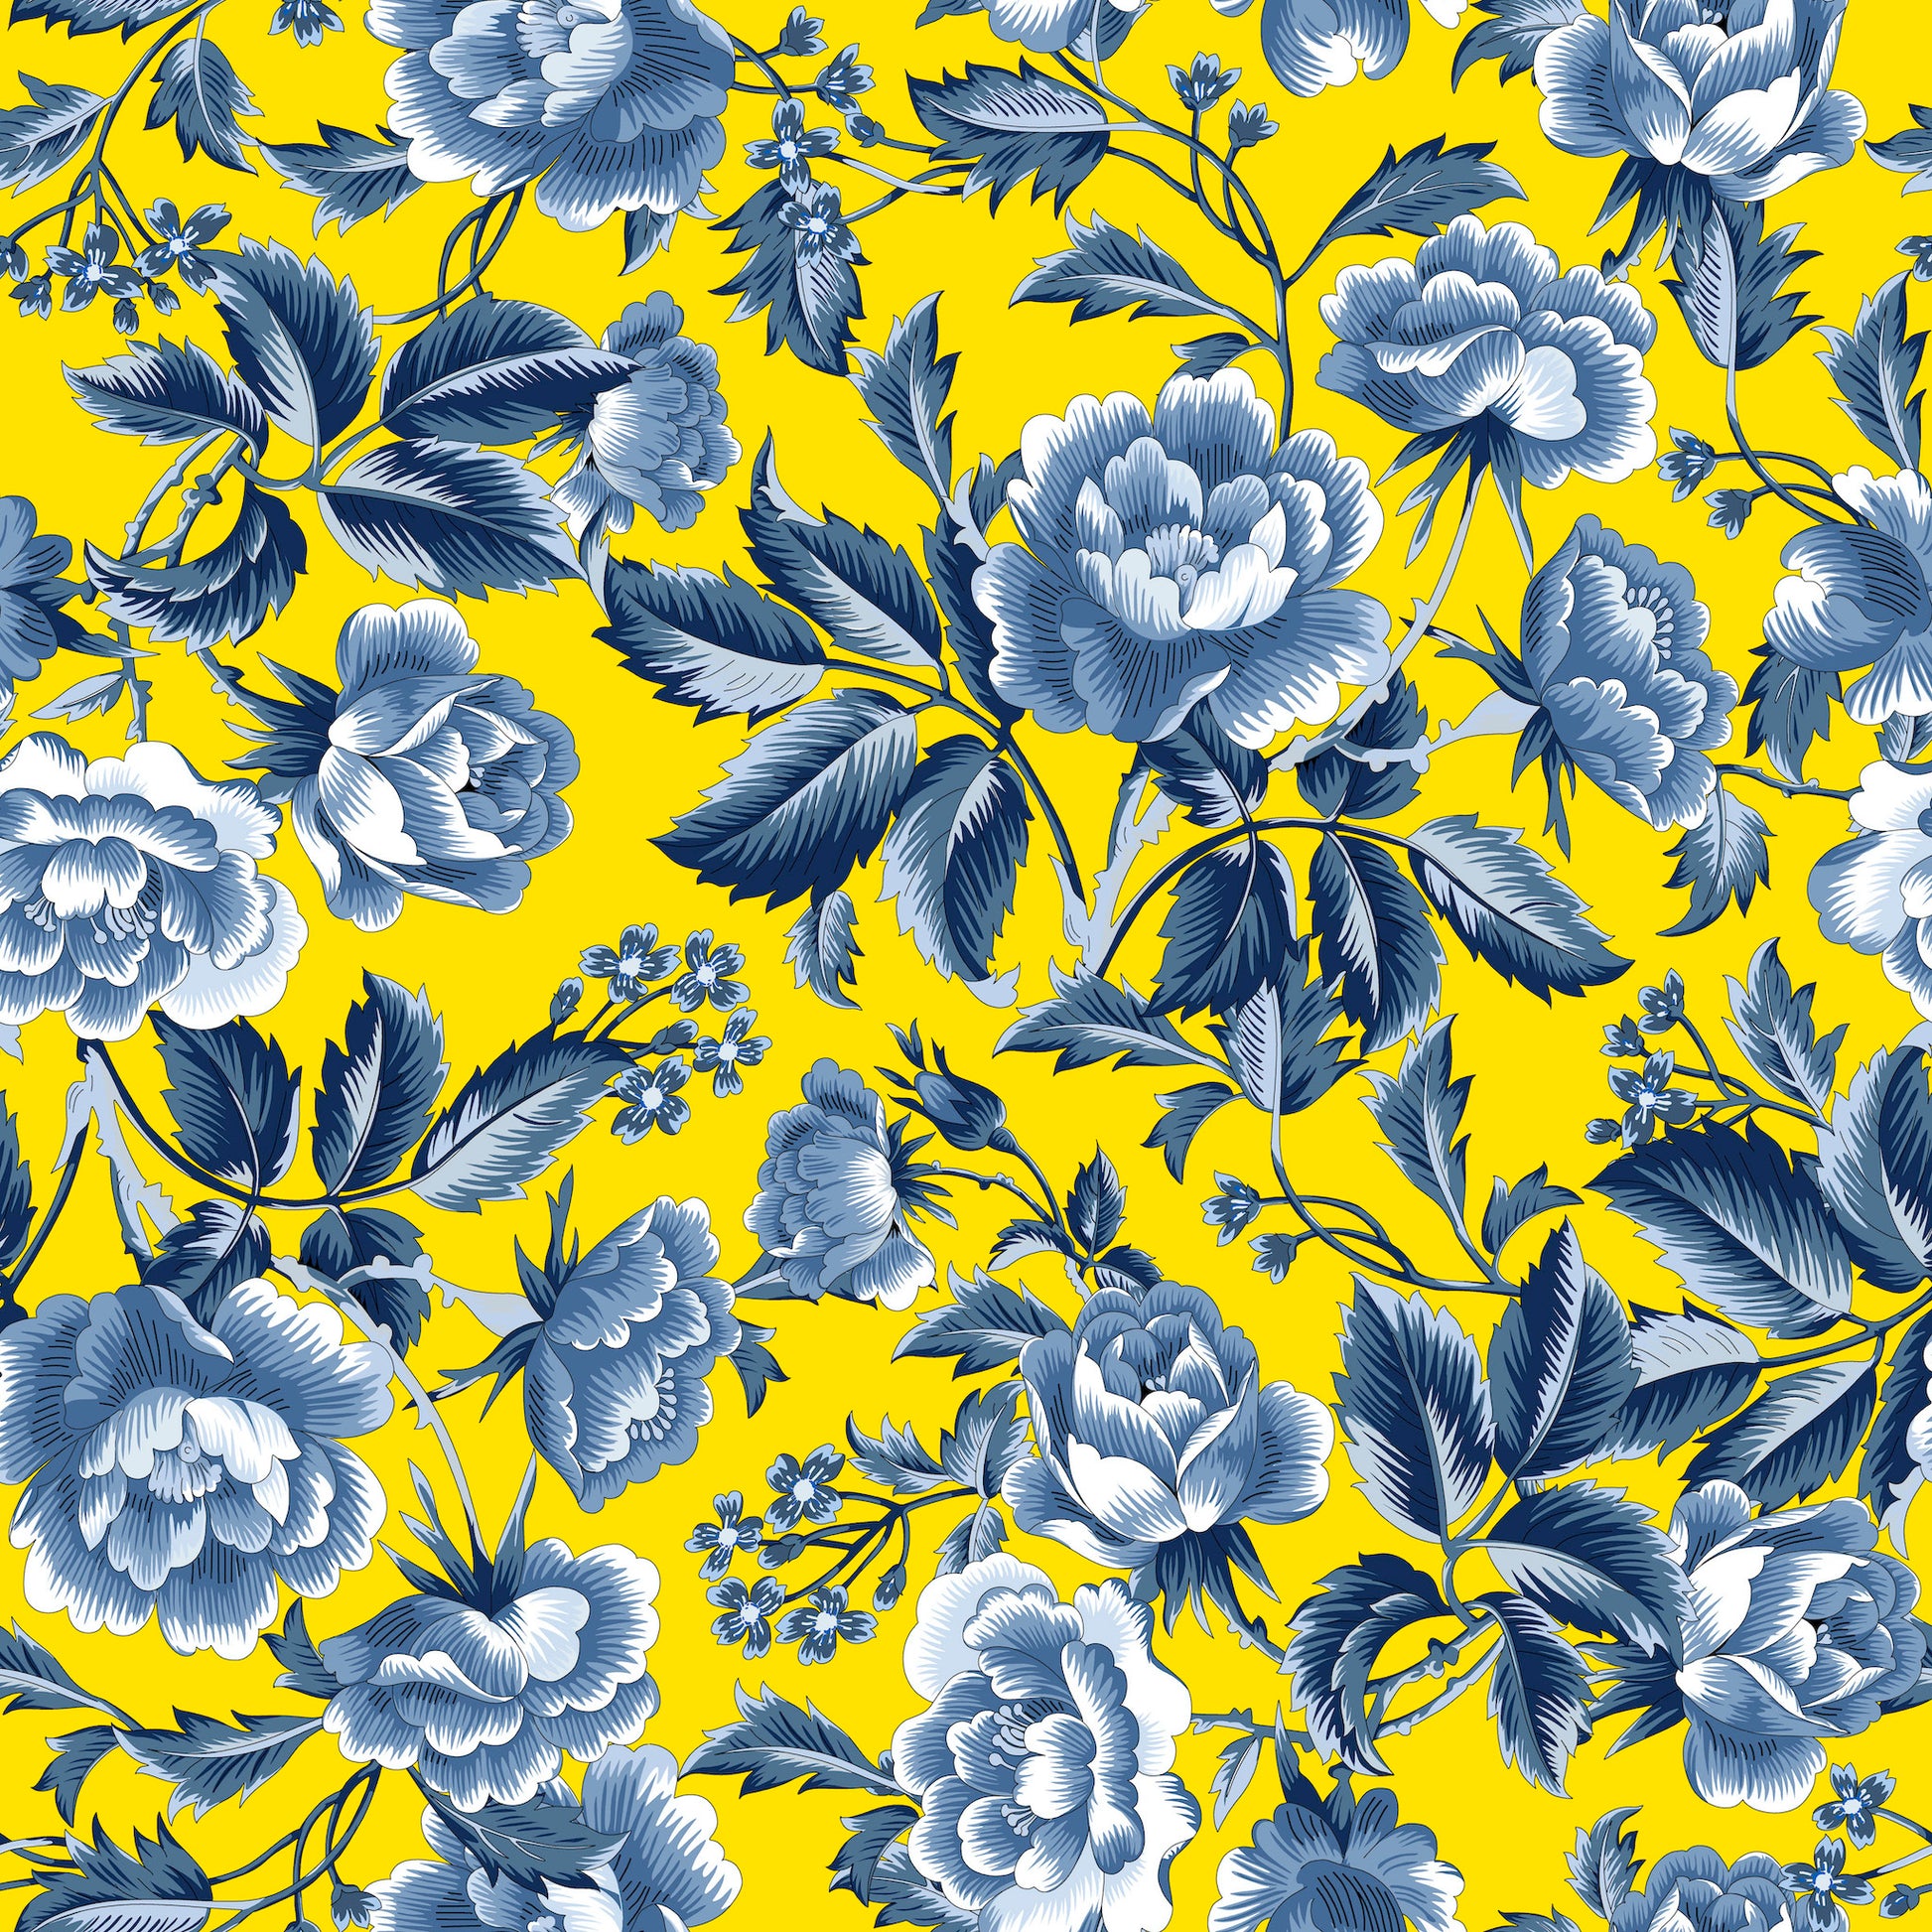 blue denim roses peel and stick removable fabric wallpaper